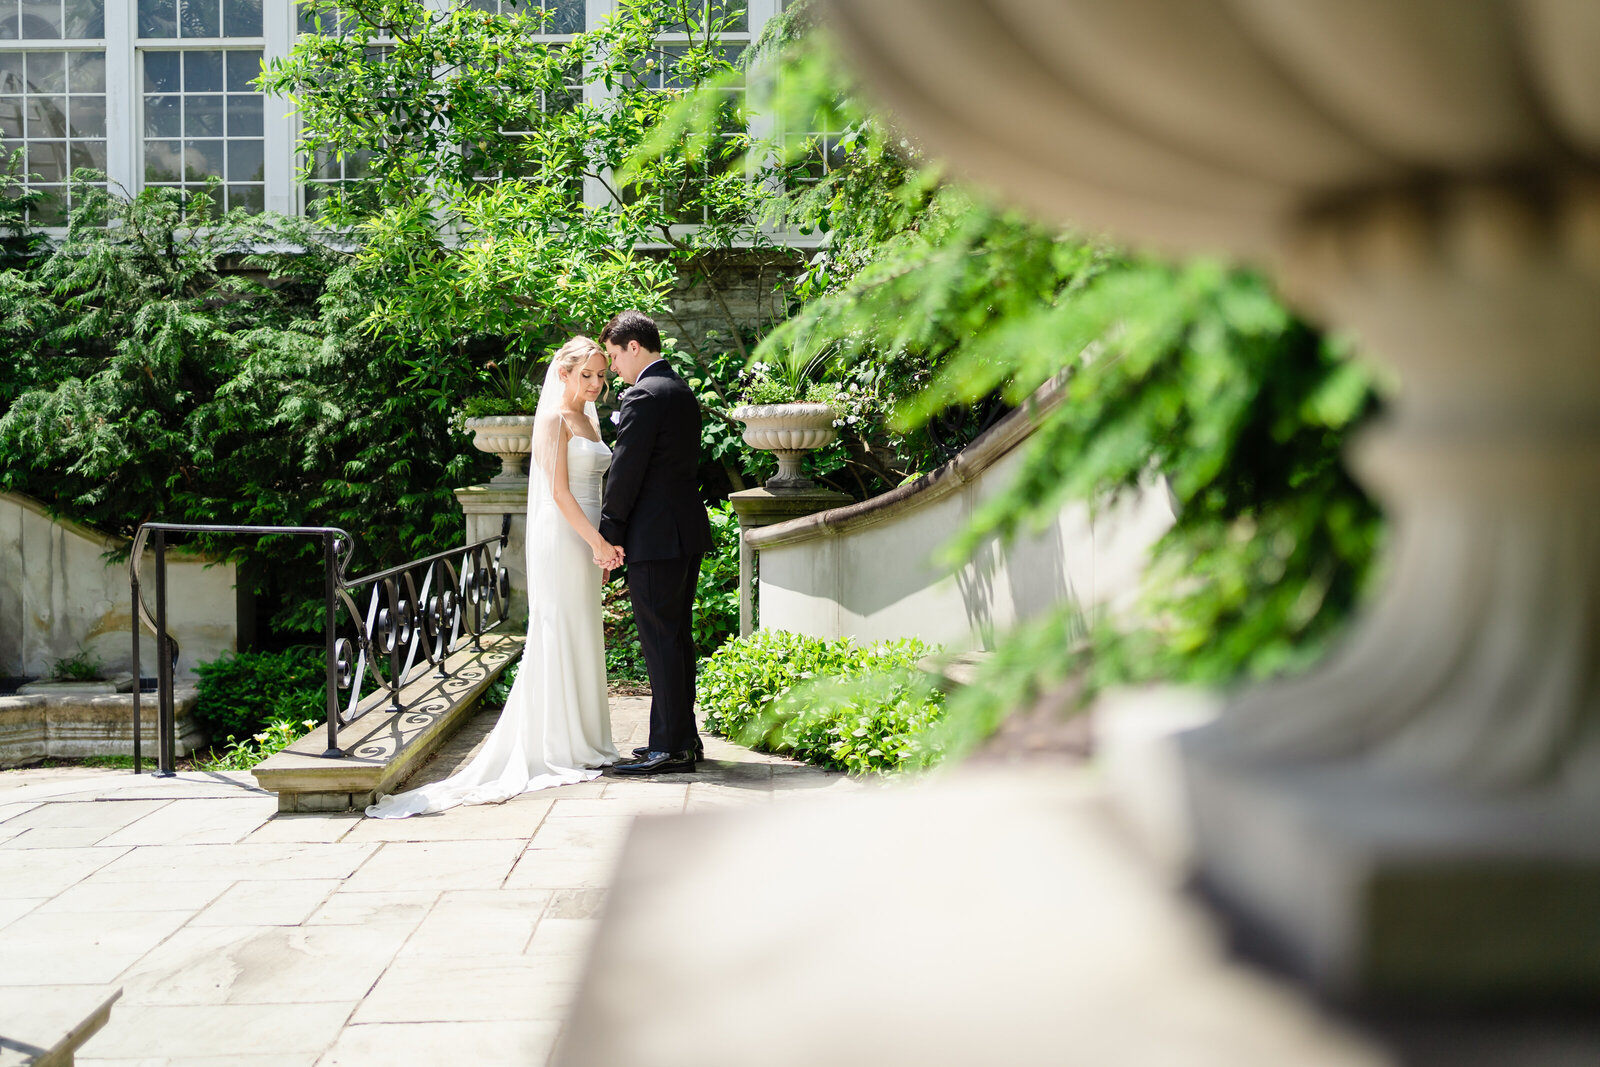 Bride and groom embrace each other in the Bride's Garden at the Franklin Park Conservatory